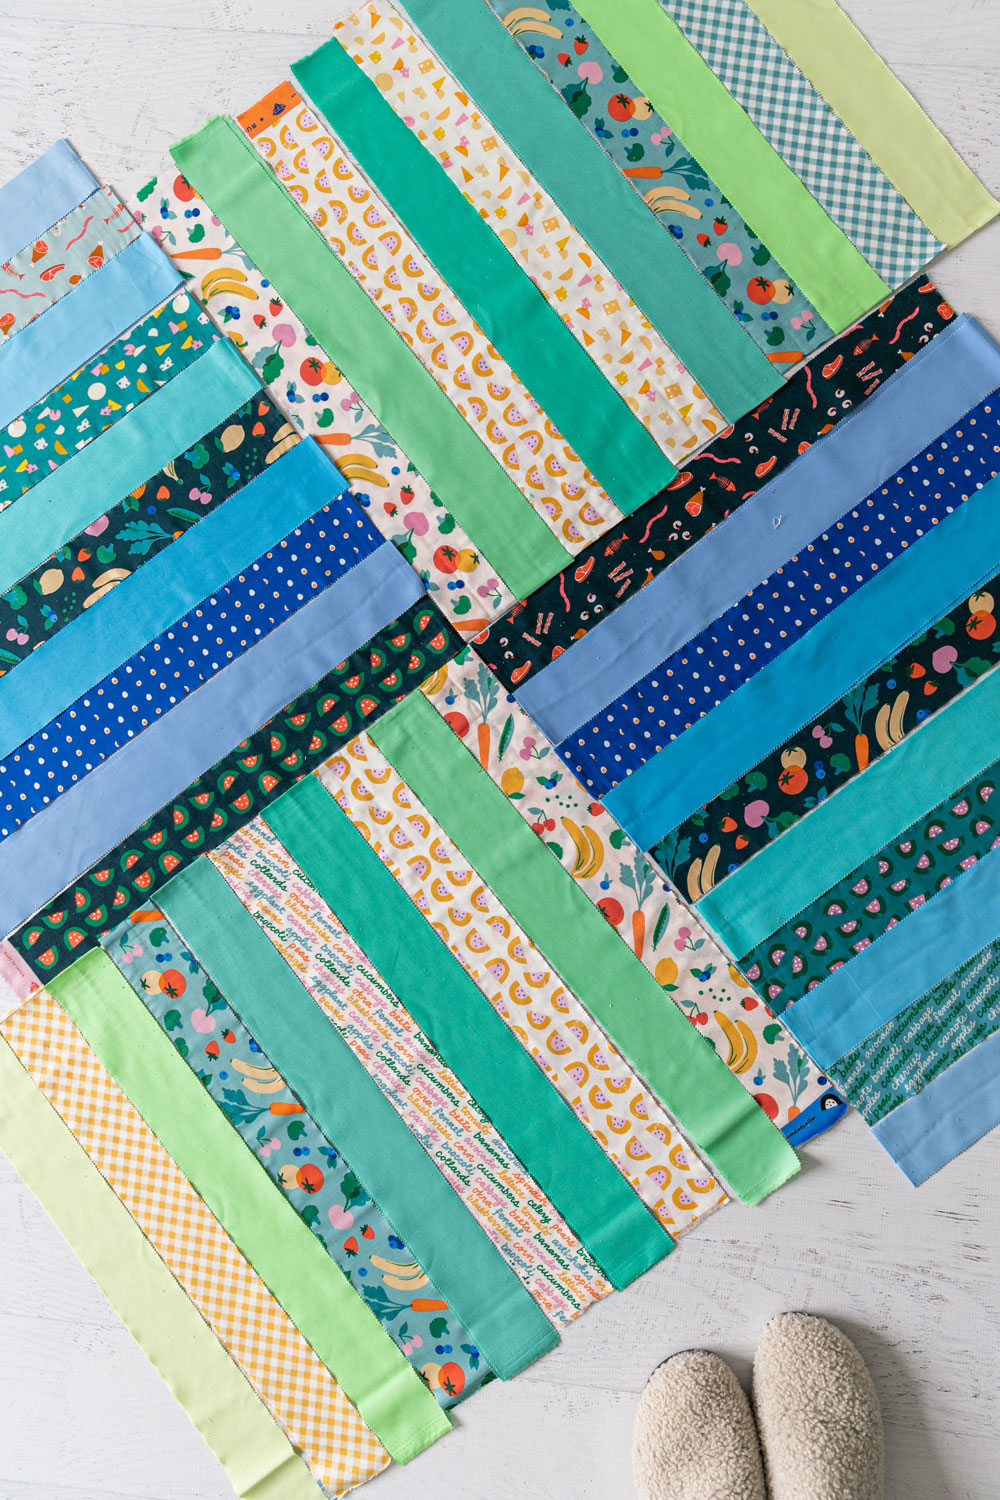 The Adventureland quilt along includes extra tips and inspiration to make this beginner and jelly roll friendly quilt pattern. suzyquilts.com #quiltpattern